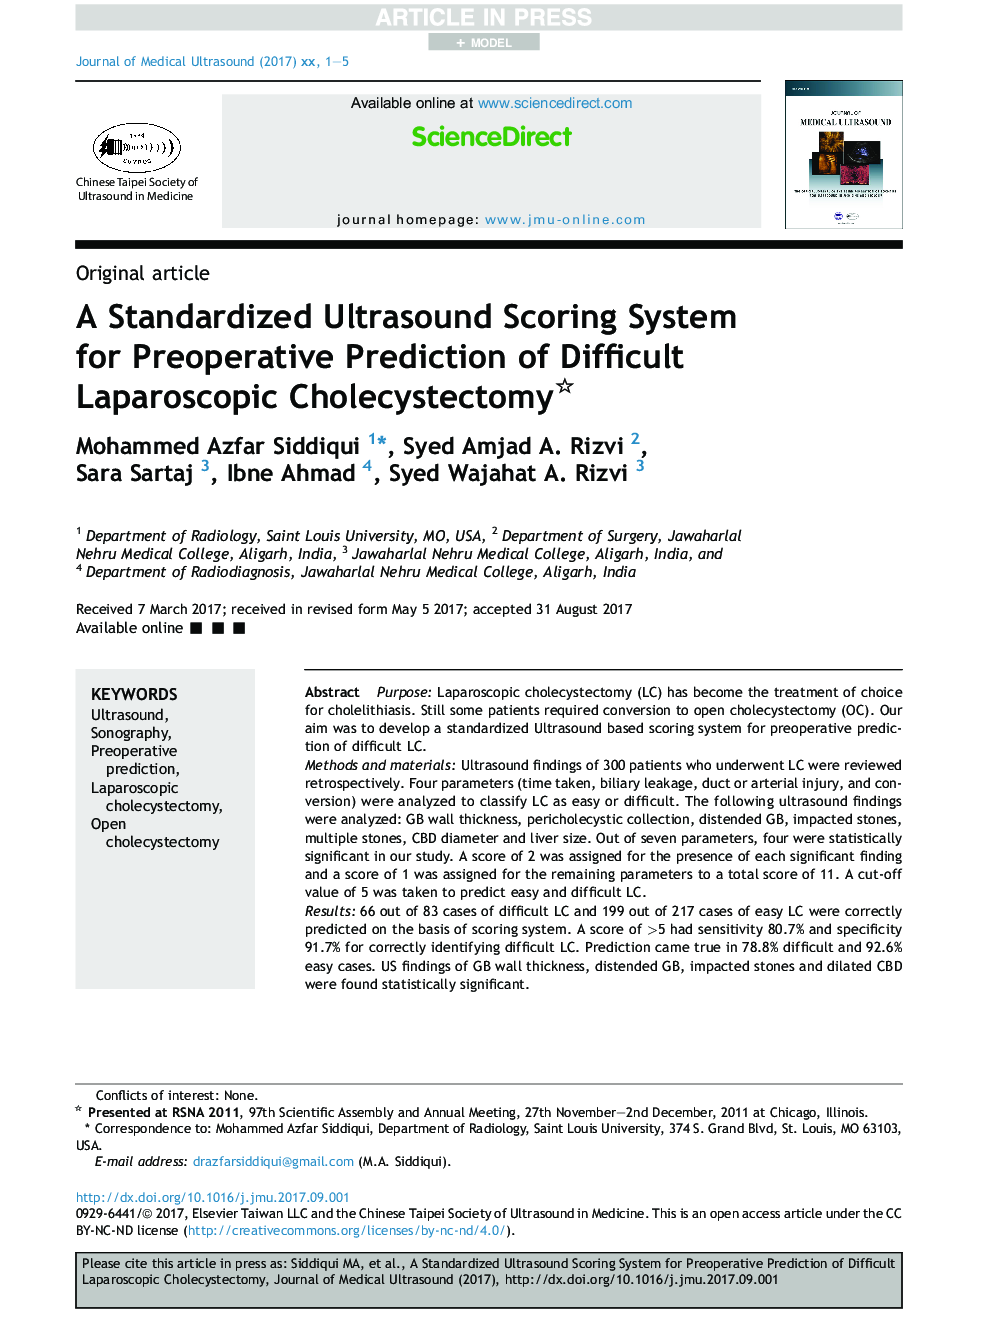 A Standardized Ultrasound Scoring System for Preoperative Prediction of Difficult Laparoscopic Cholecystectomy